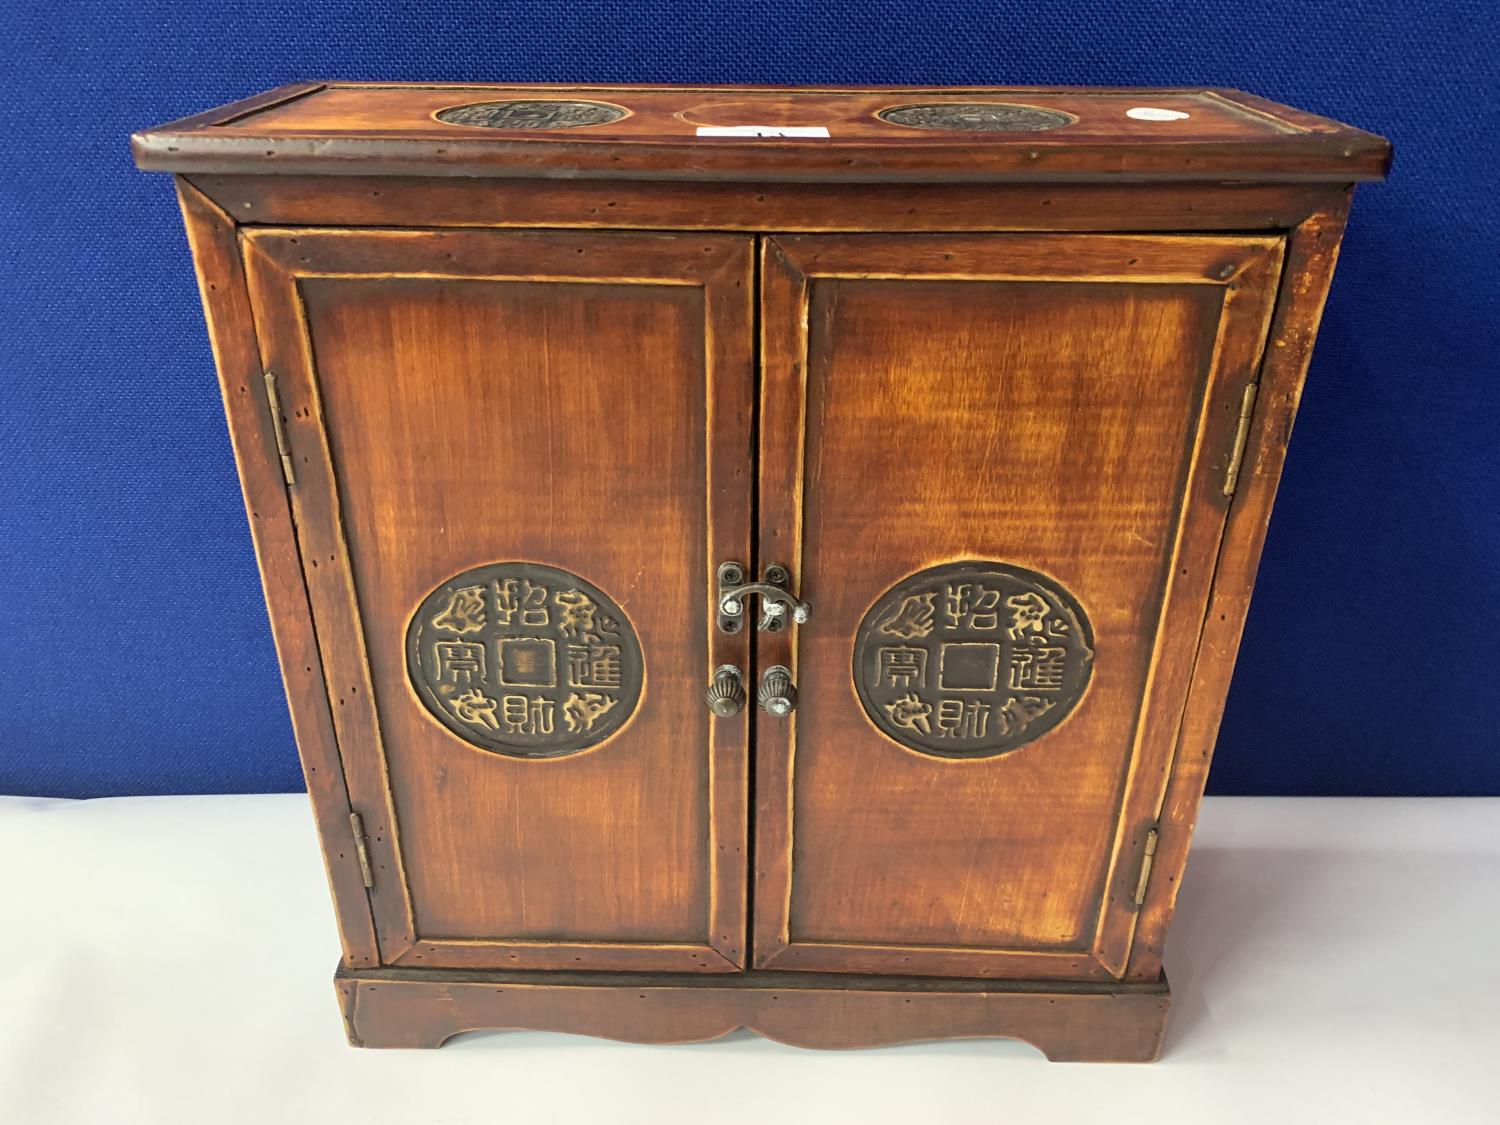 AN ORIENTAL STYLE CABINET WITH INLAID CIRCULAR PANELS - Image 2 of 9